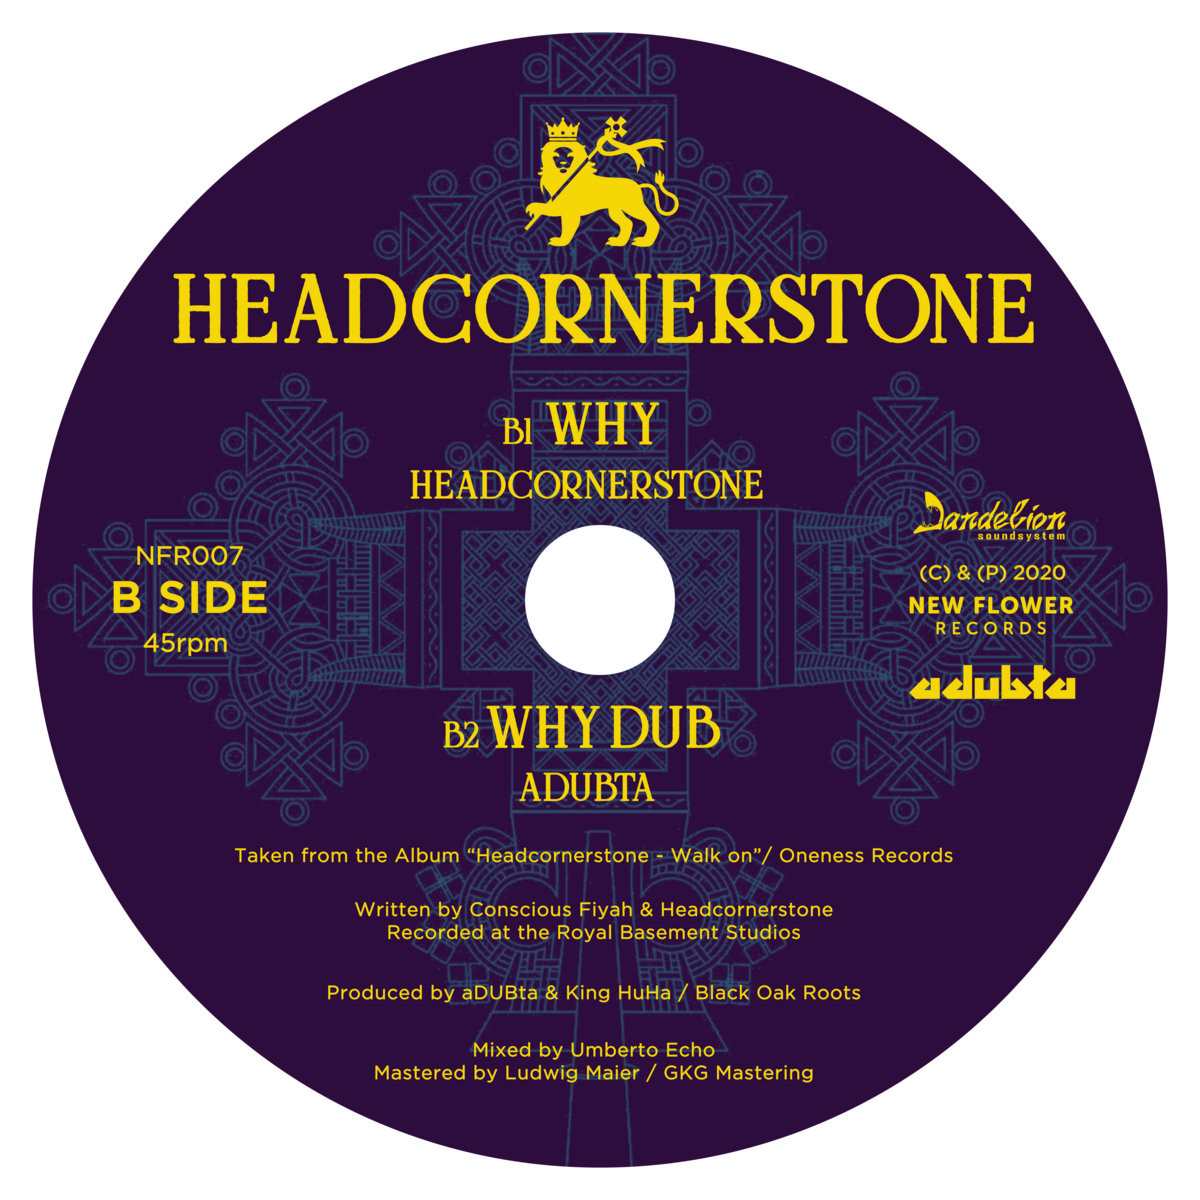 Crystal Towers / Why - Headcornerstone - Newflower Records - Release: 11/02/2020